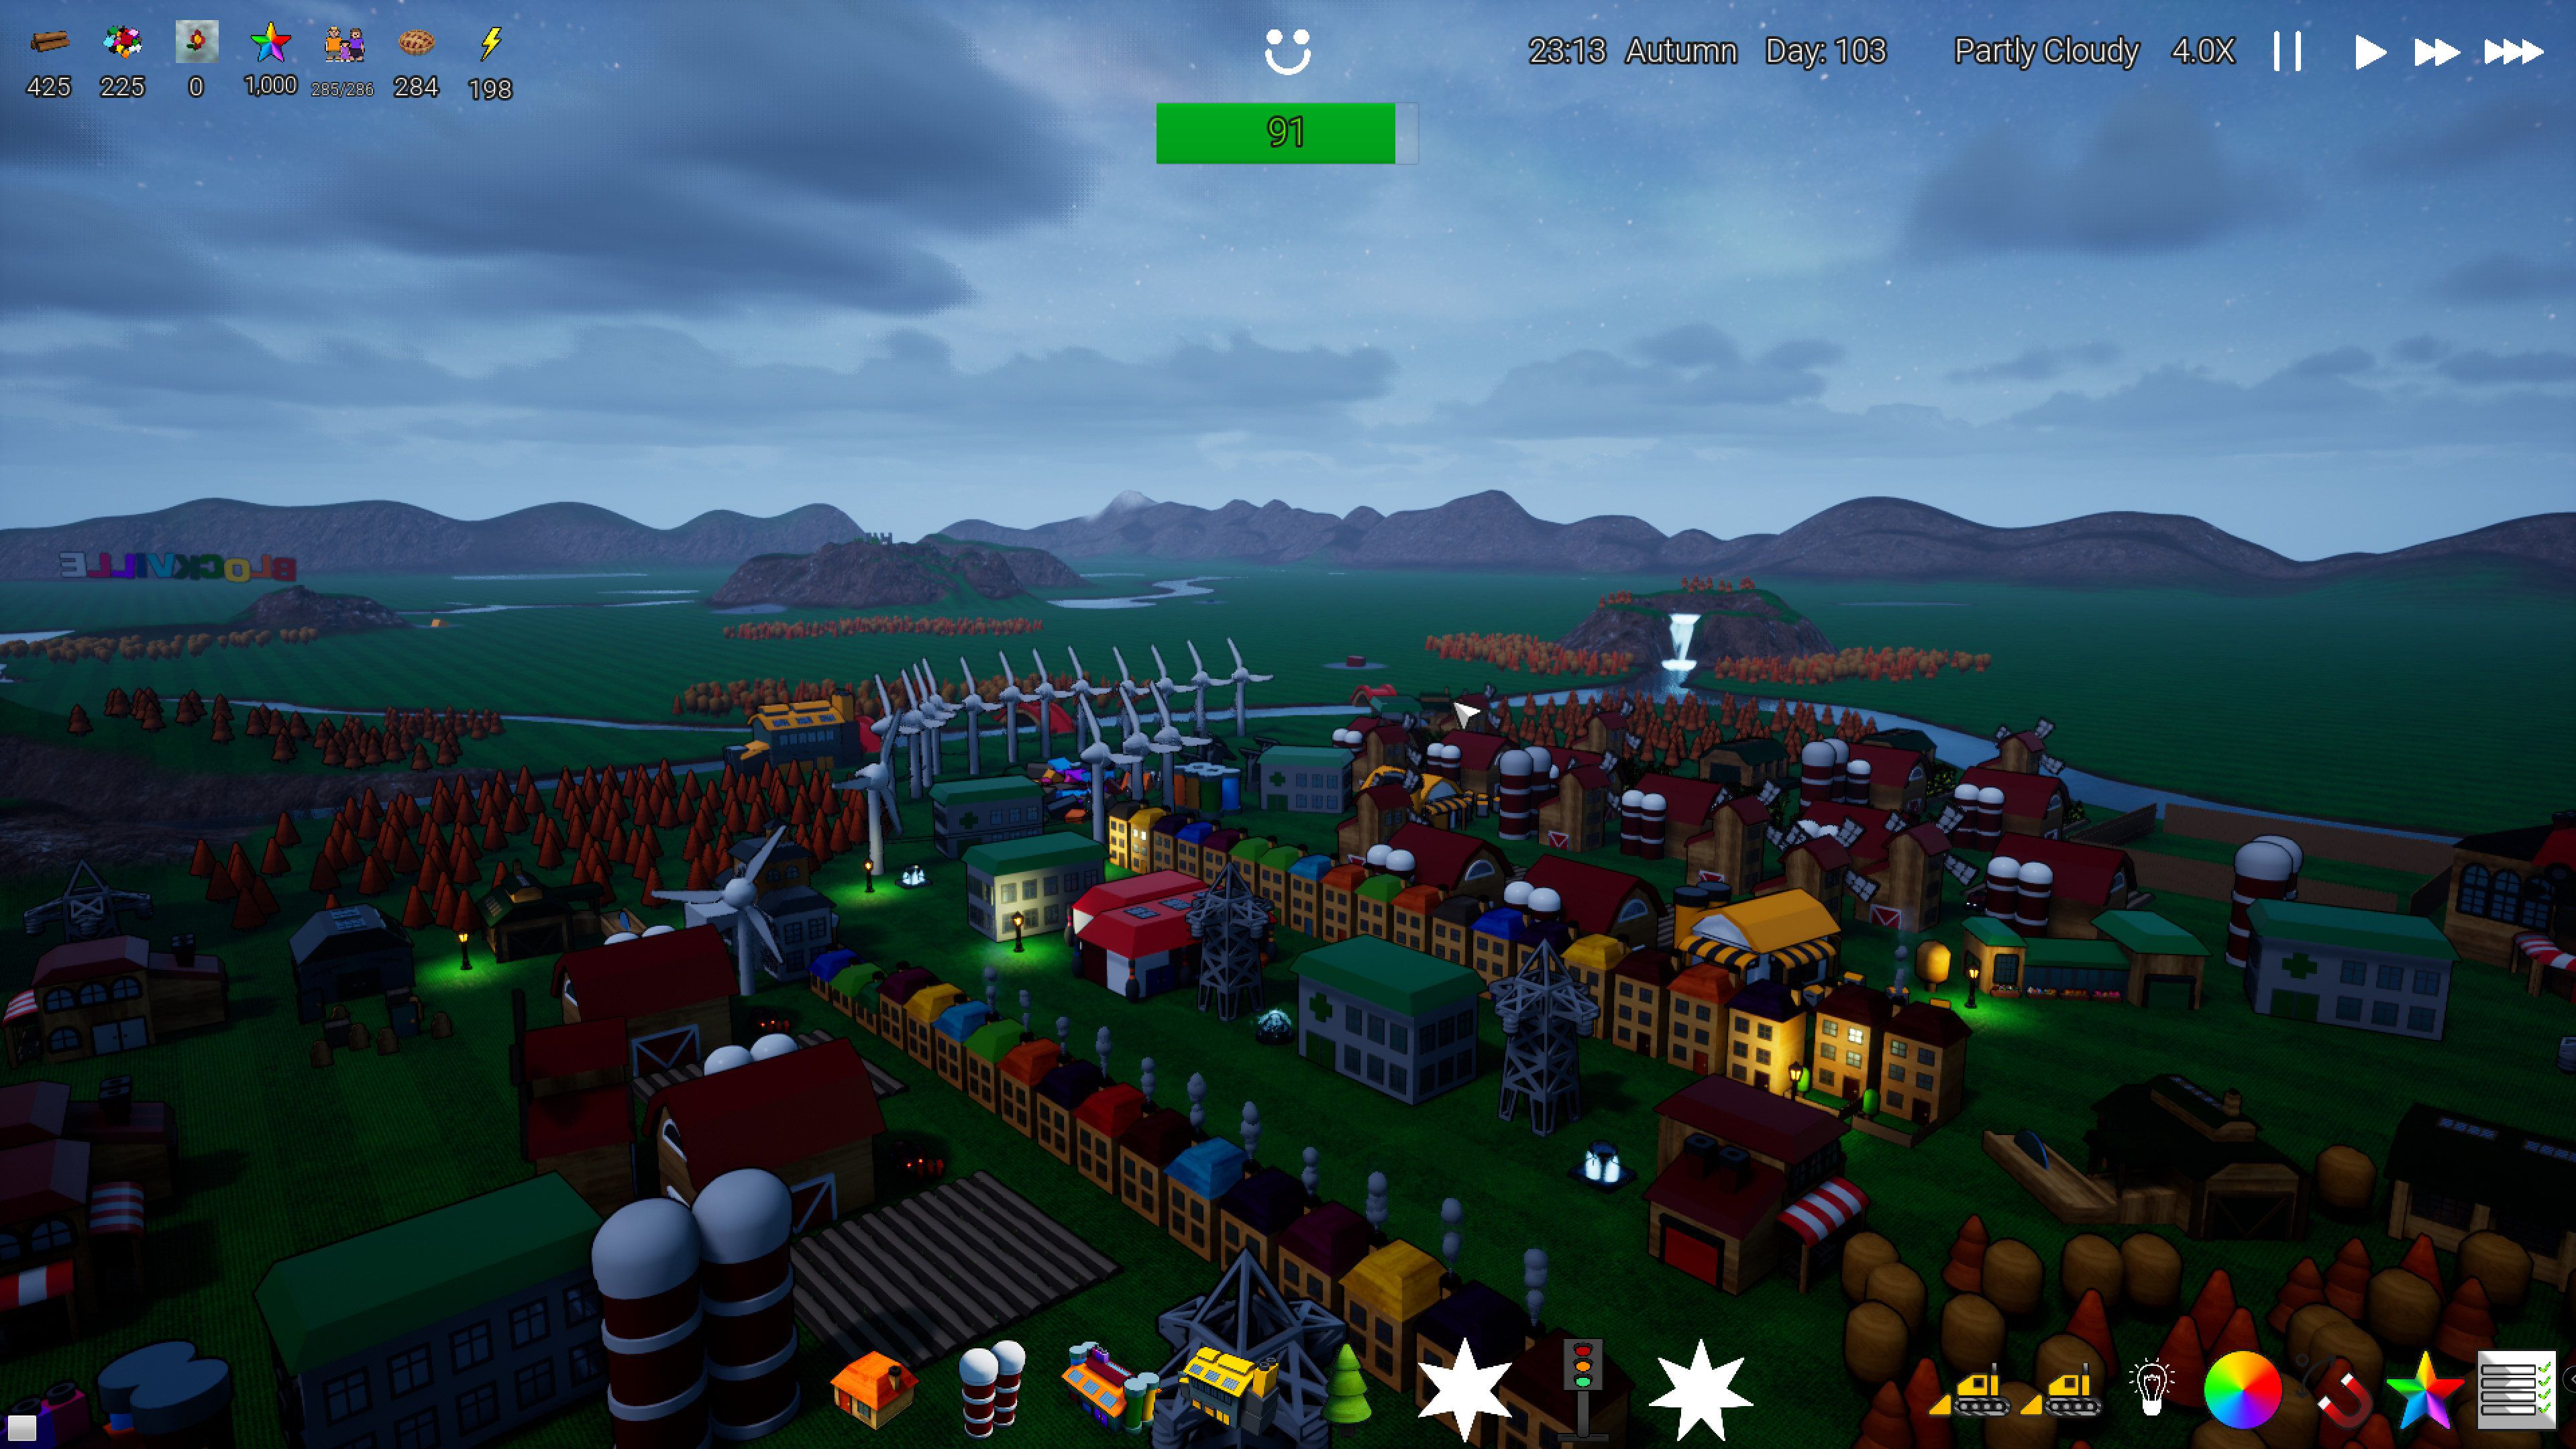 Partly cloudy skies over Blockville